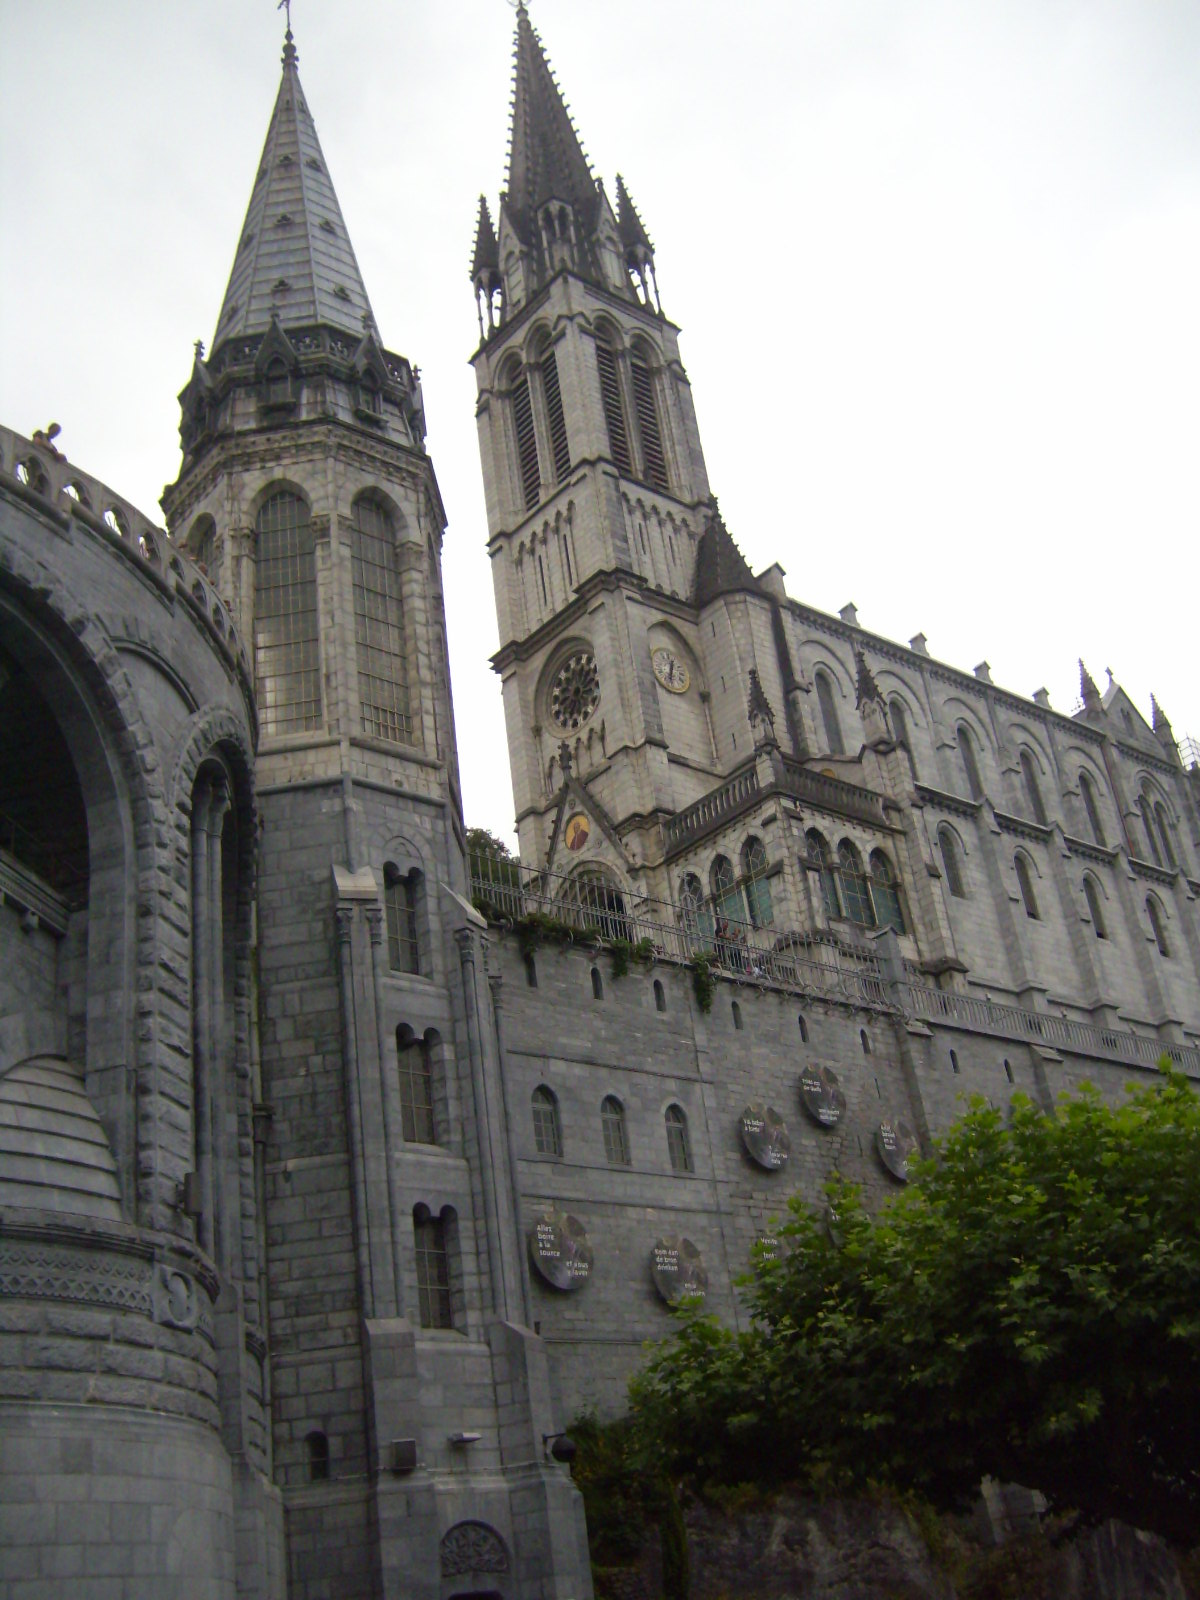 Cathedral of lourdes (france) photo